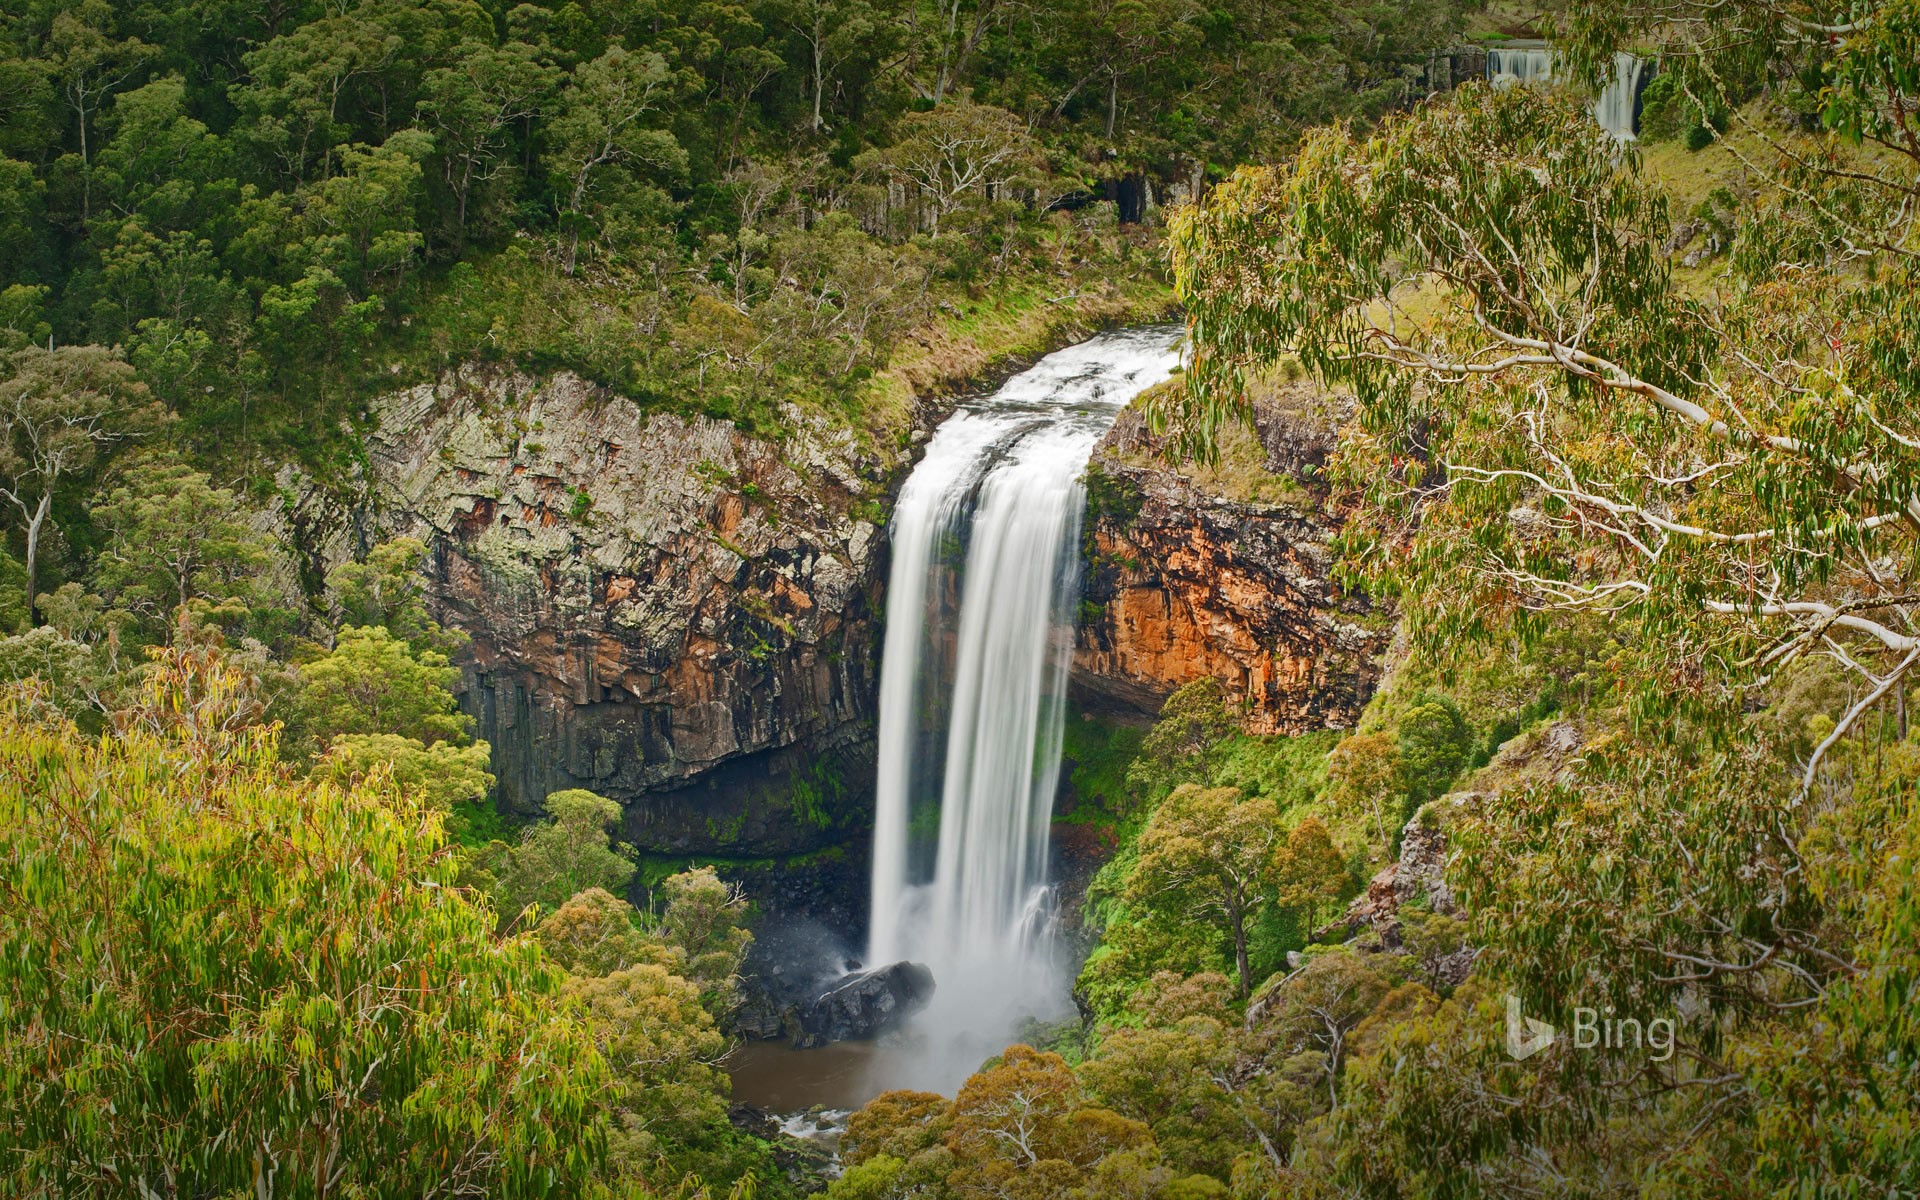 Ebor Falls in the Guy Fawkes River National Park of Australia